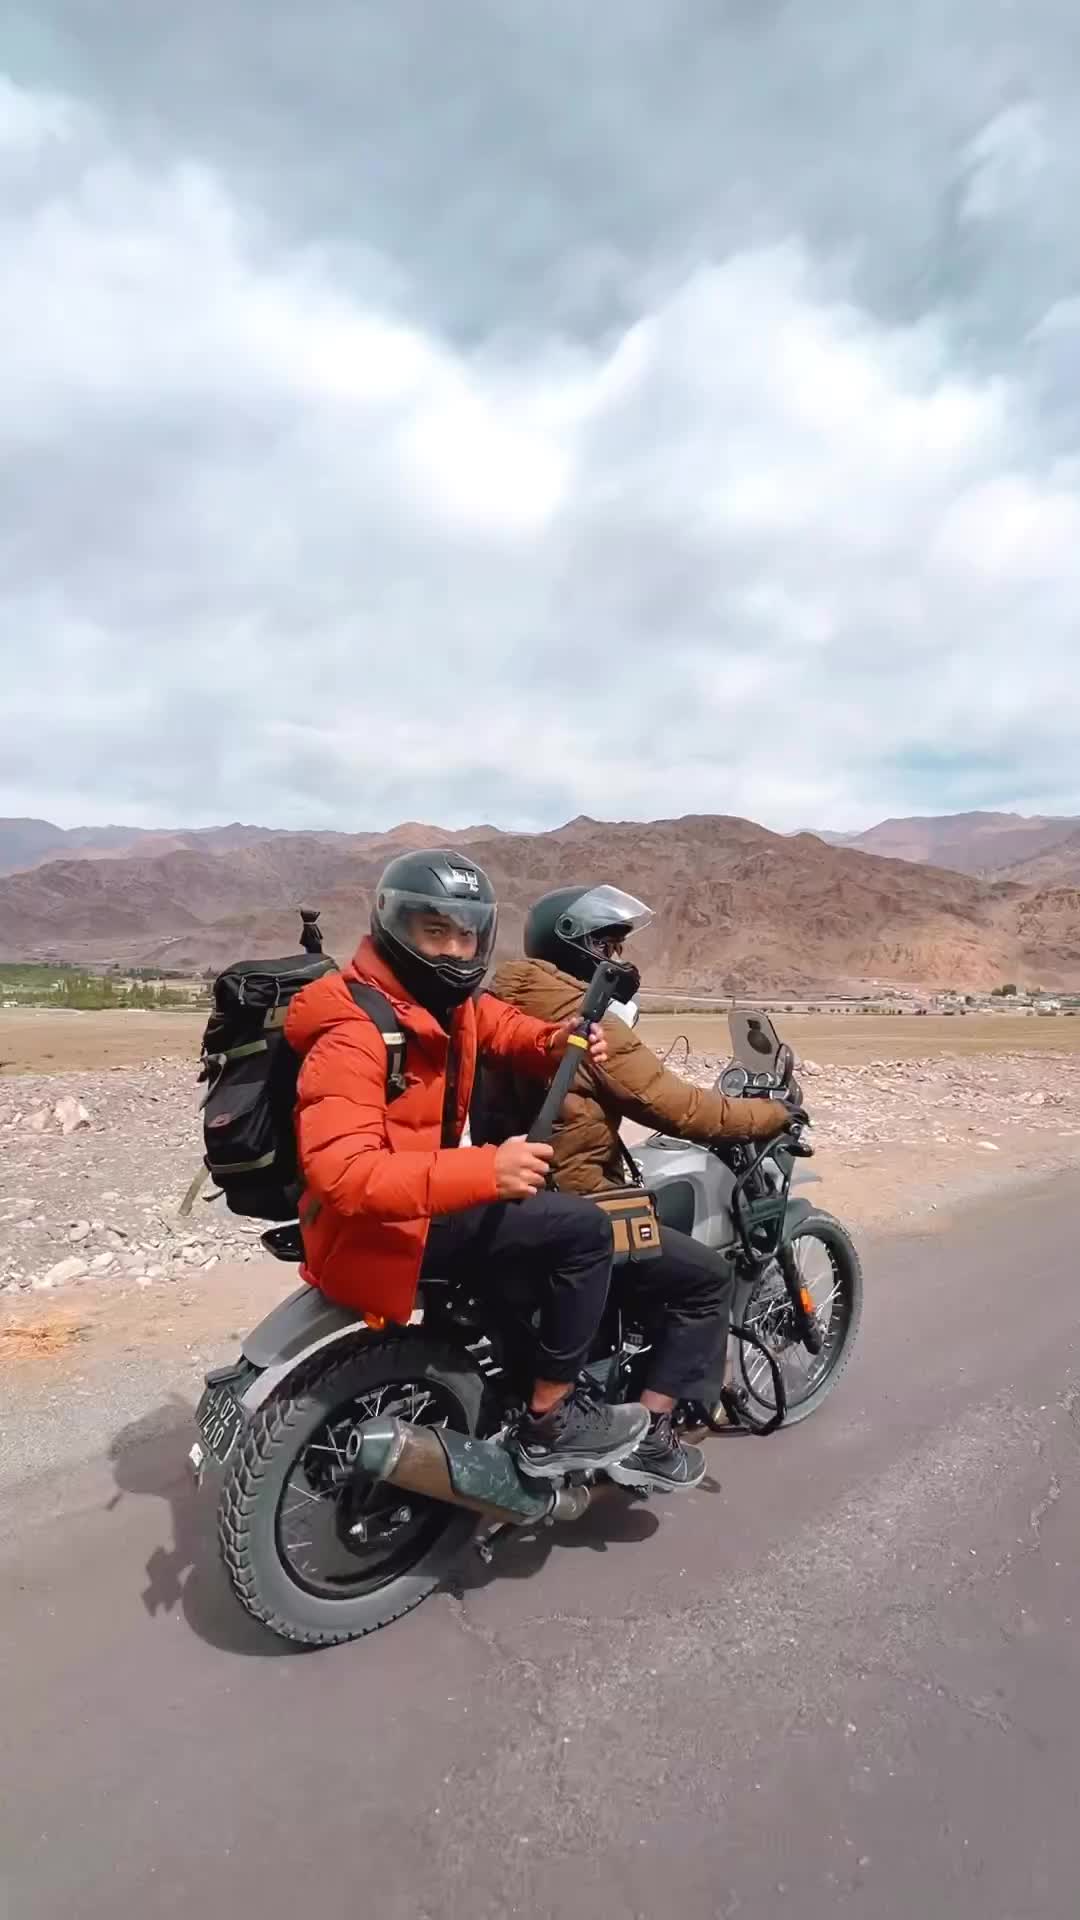 No Drone Zone in Ladakh? Travel by Motorcycle Instead!